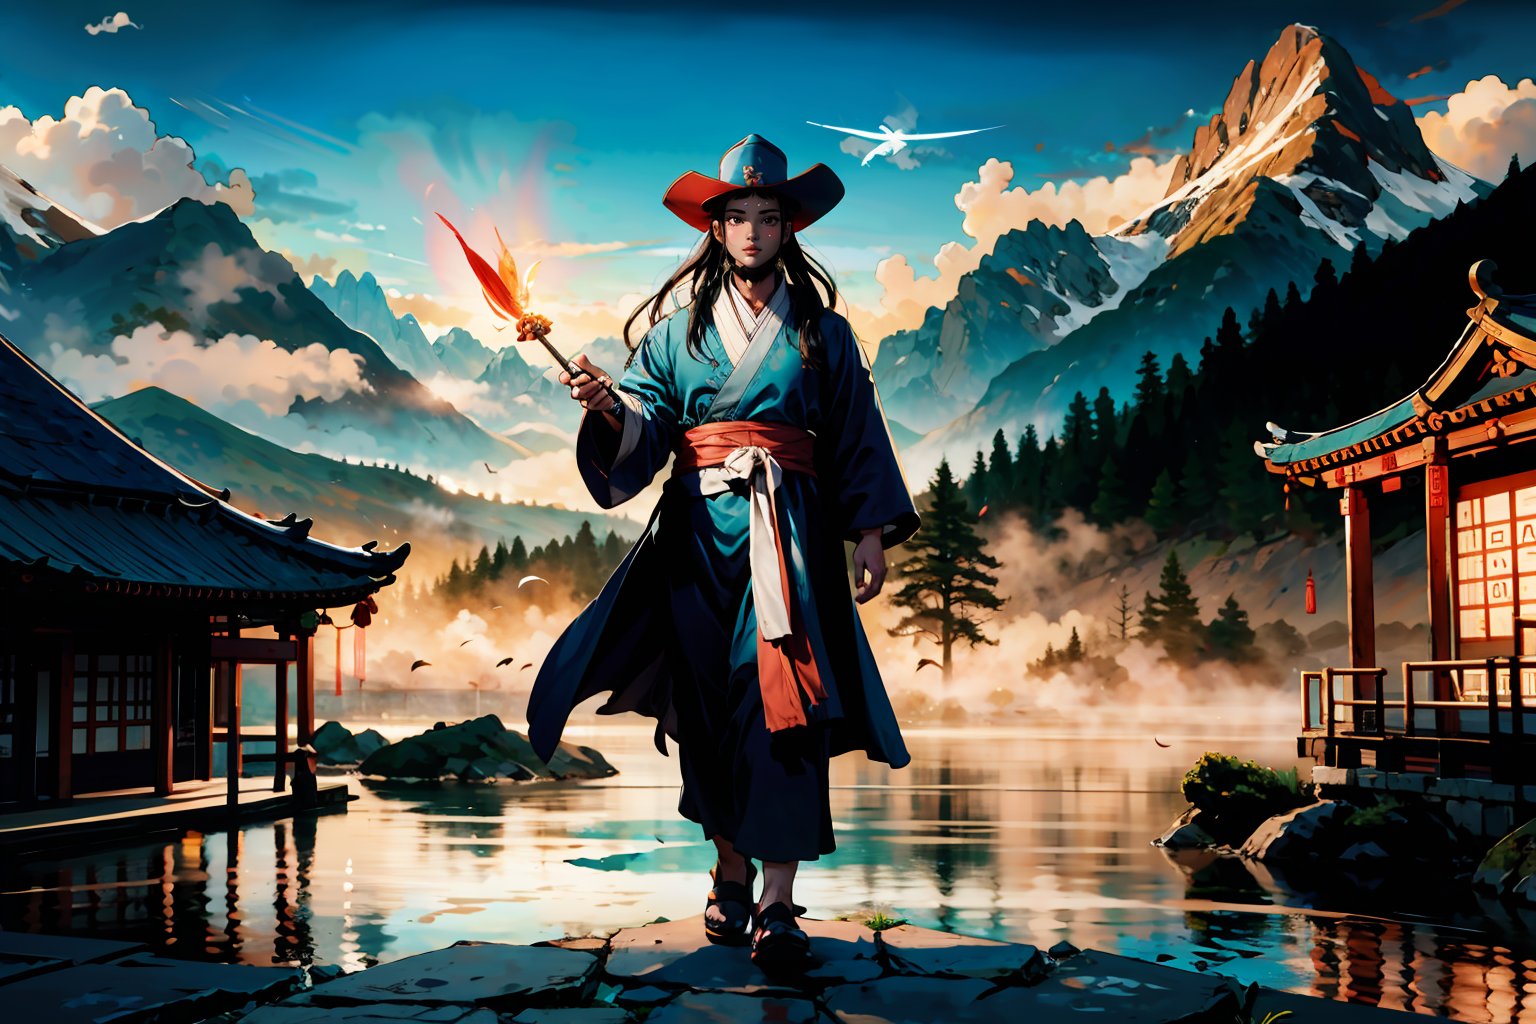 Chinese mythology story, solo, 1man, forty years old, Taoist hat, long black hair, two beards, aqua Taoist robe, holding a feather fan, thin and tall, full body, mountain, chinese temple background, boichi manga style